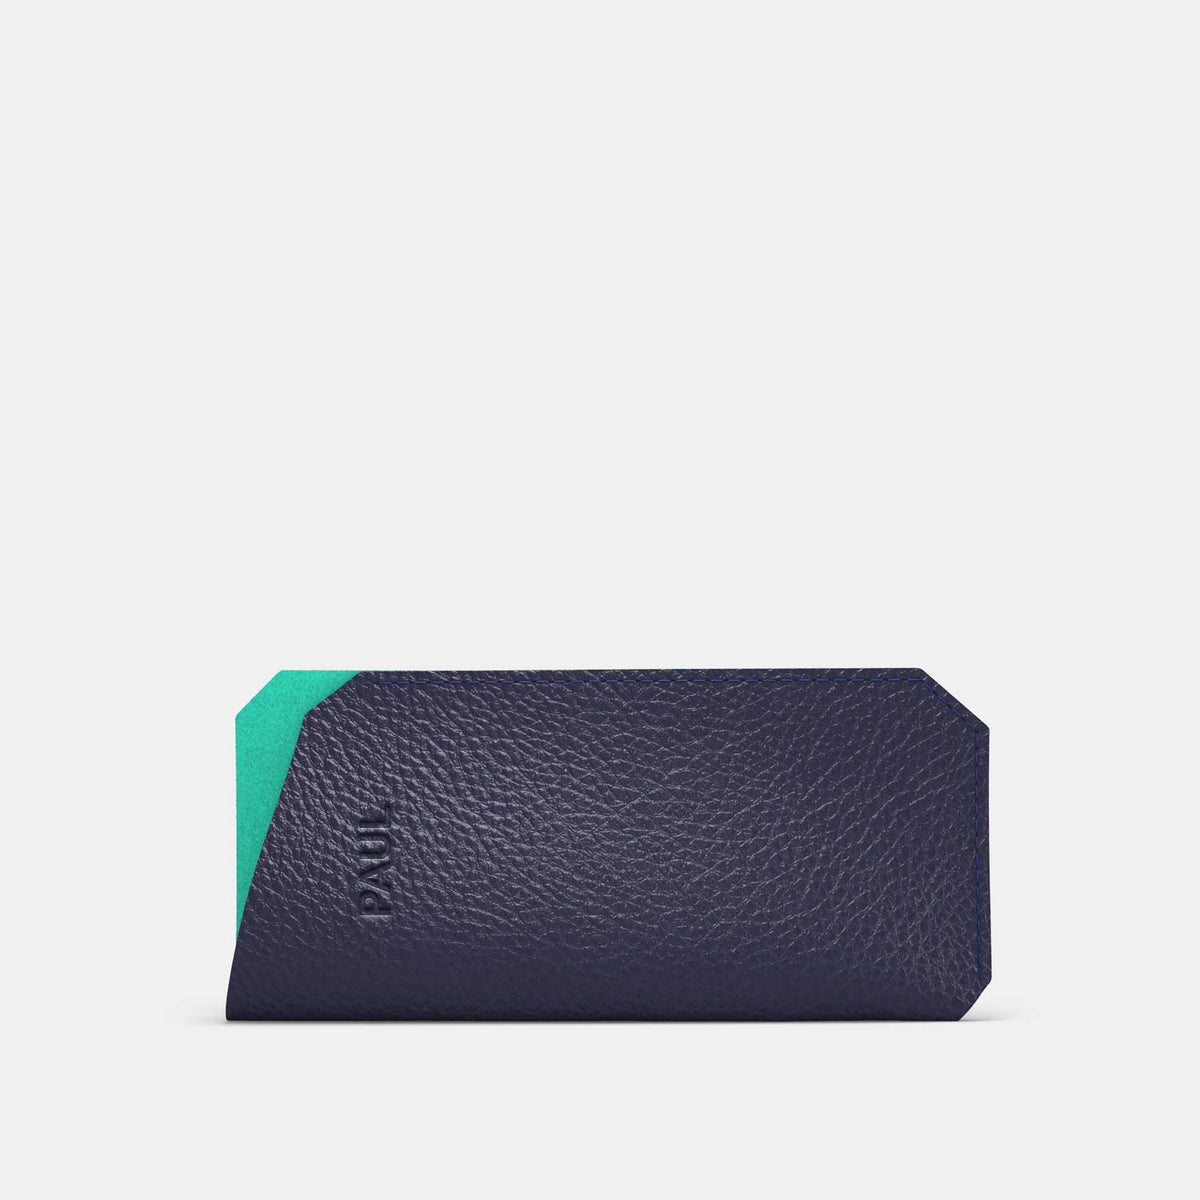 Leather Sunglasses Case - Navy Blue and Mint - RYAN London